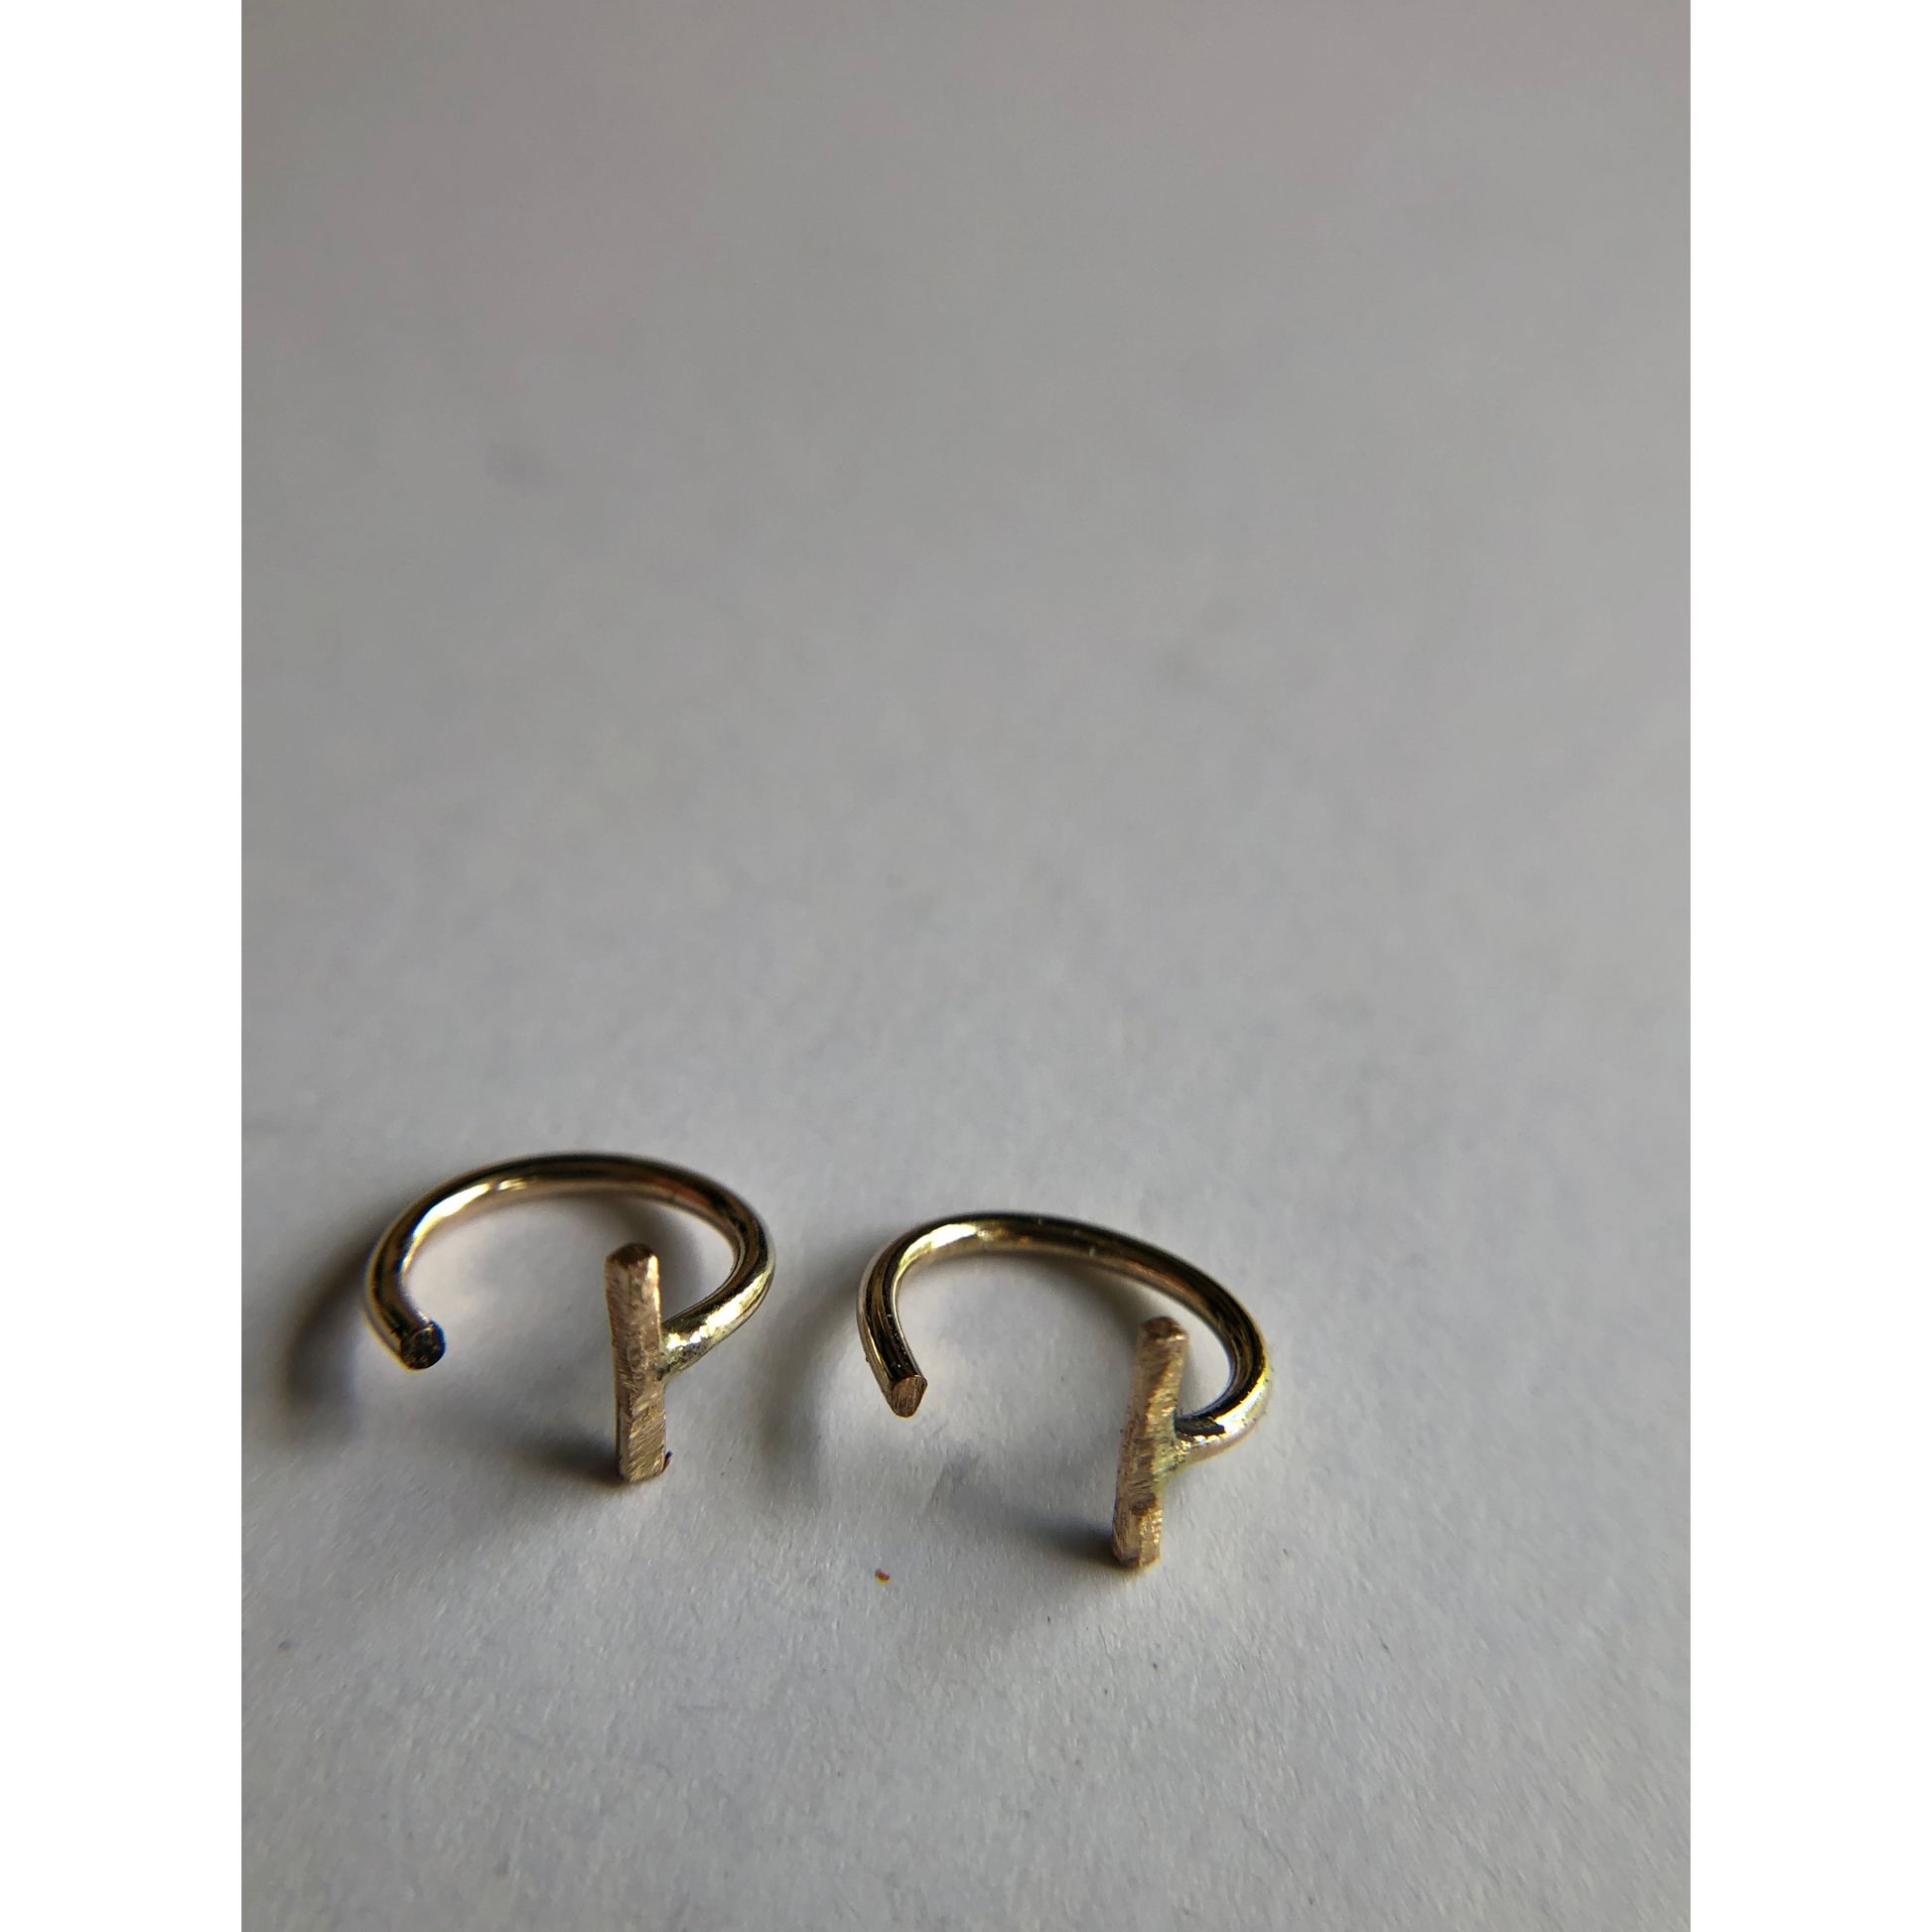 small gold half hoops with bar on one side (ear side) hugs close to ears